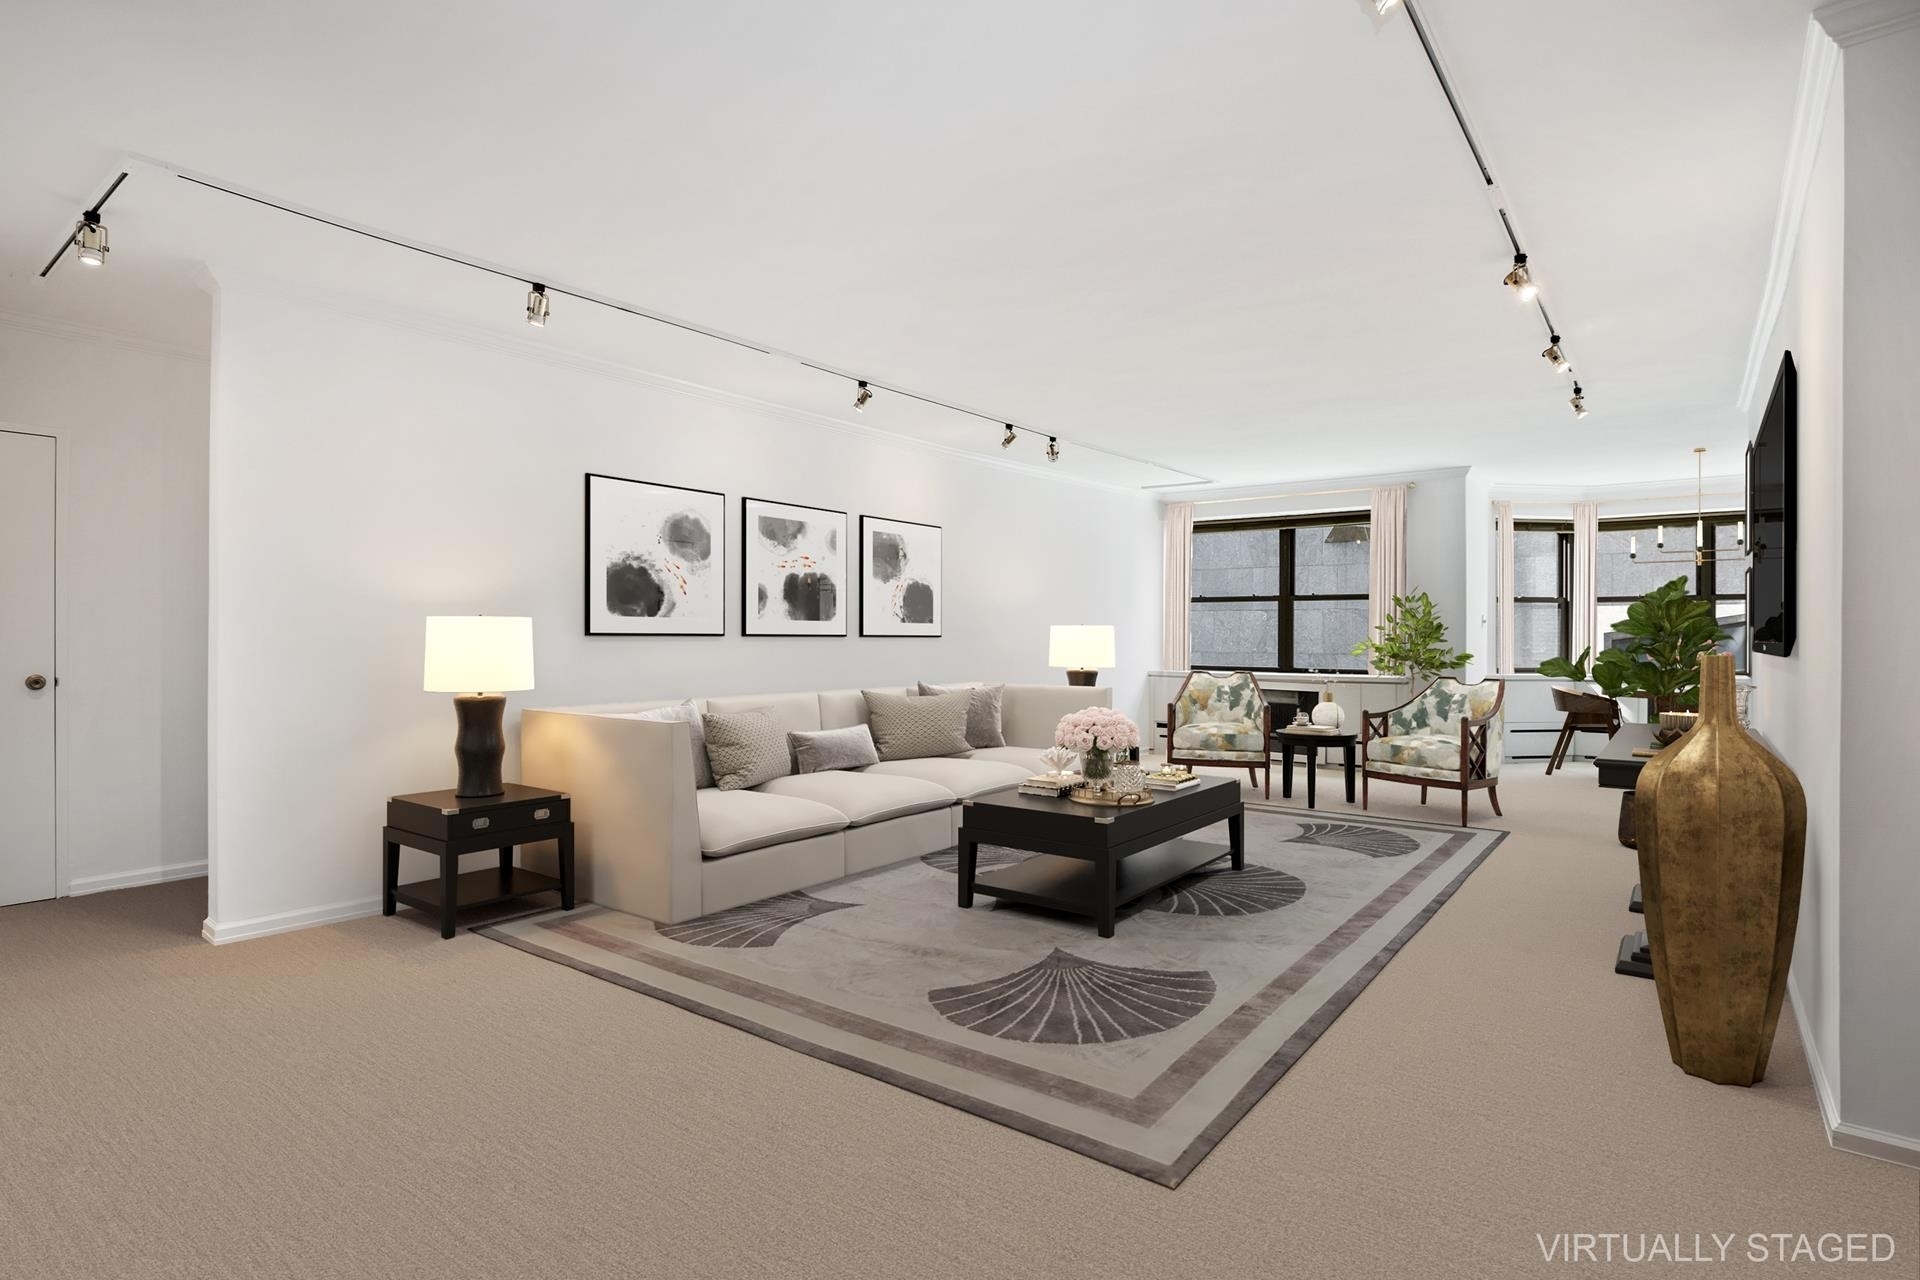 Co-op Properties for Sale at The Montclair, 35 E 75TH ST, 6B Lenox Hill, New York, New York 10021